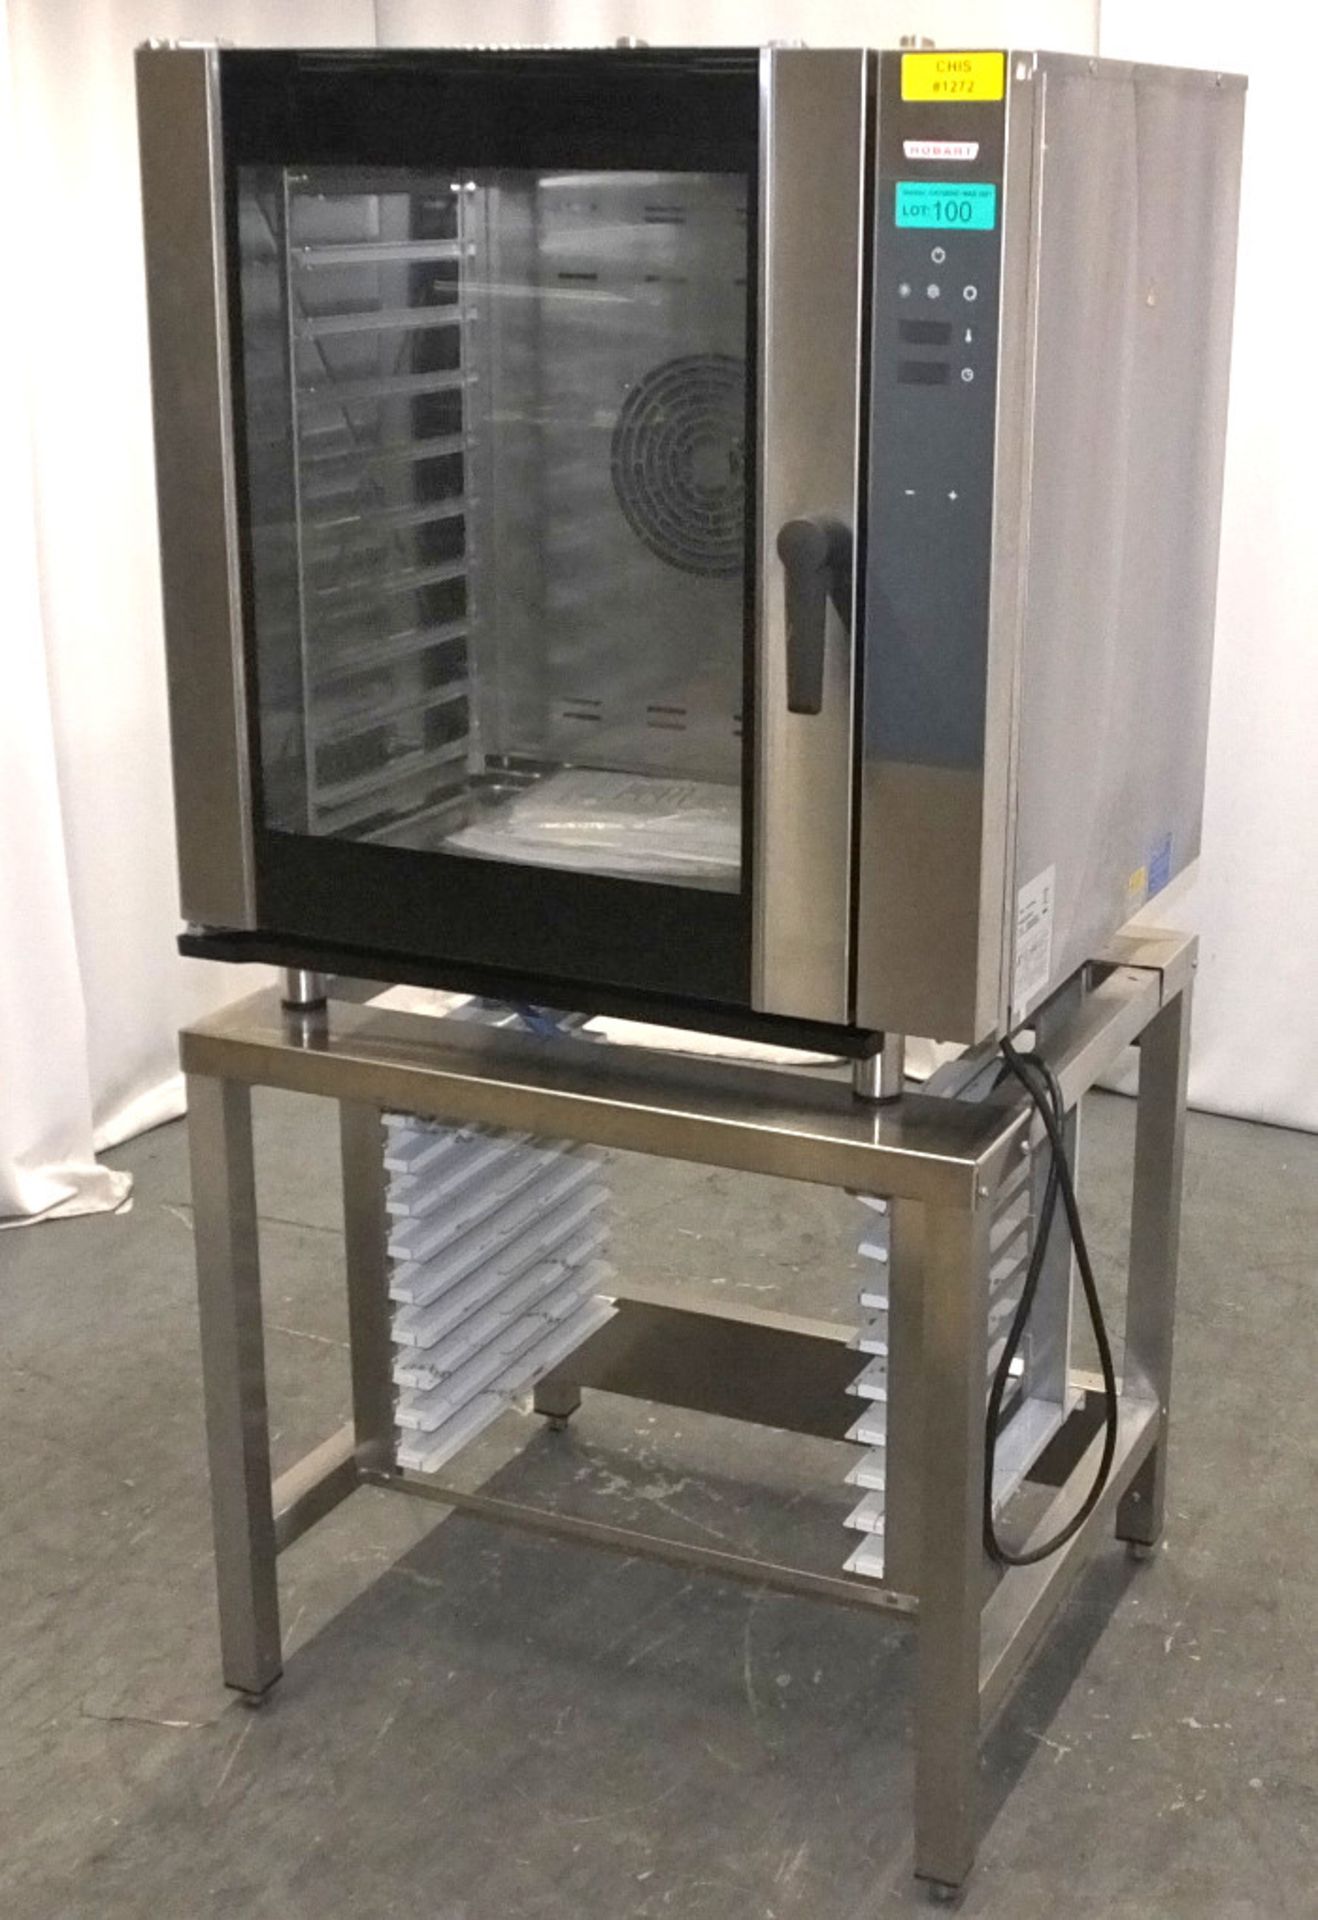 Hobart CYG10 Convection Oven - Natural Gas - 19.5kW - Image 2 of 12